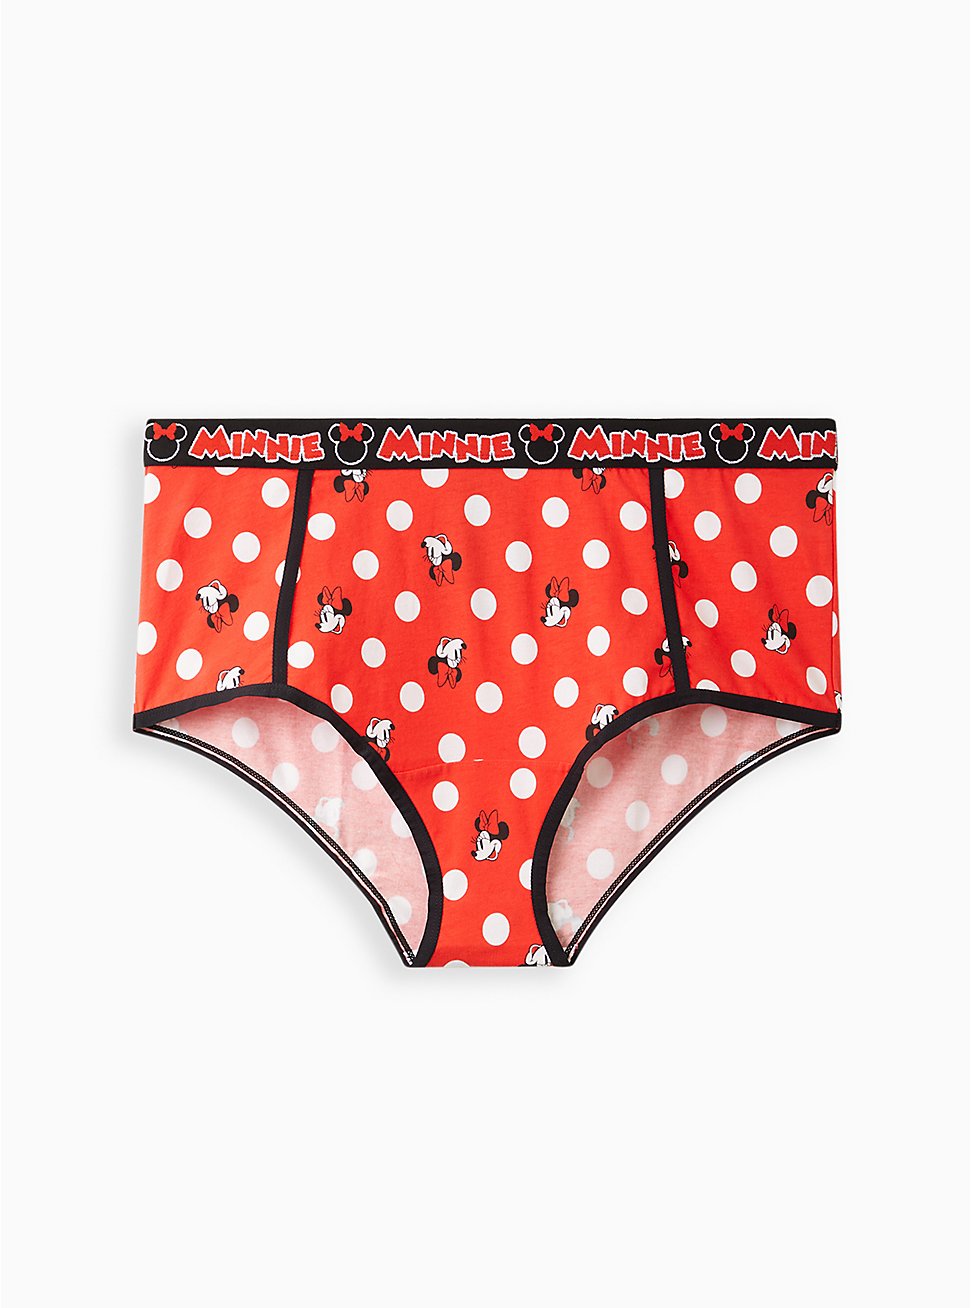 Brief Panty - Disney Minnie Mouse Polka Dot Red, MULTI, hi-res